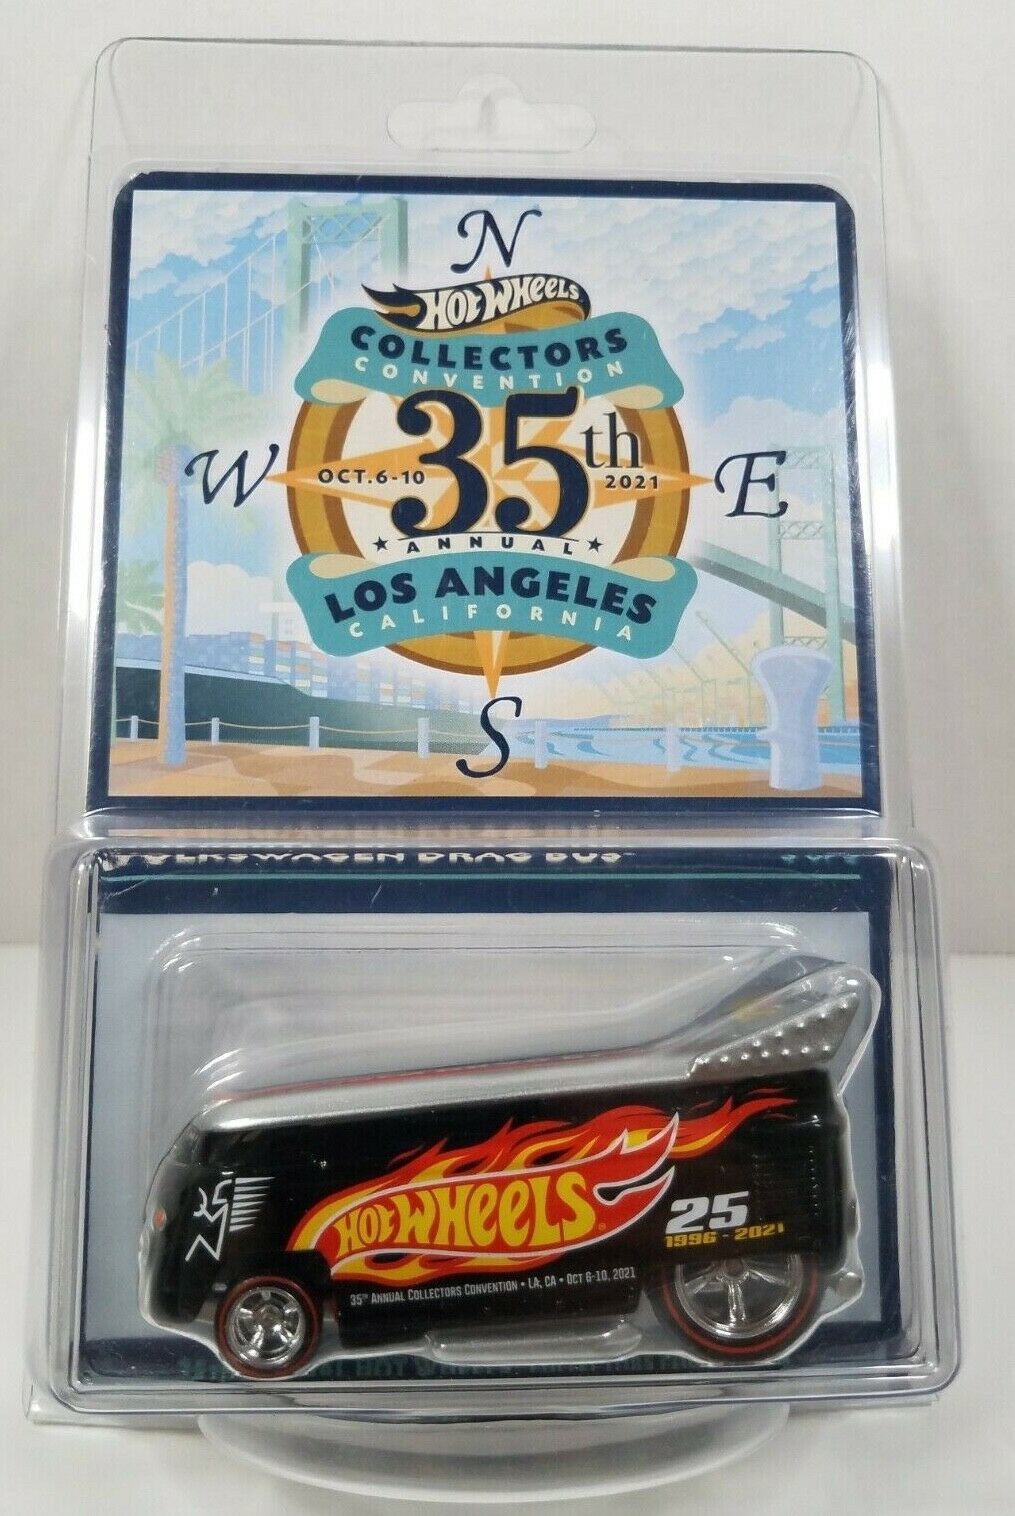 Hot Wheels Volkswagon Drag Bus 35th Annual Collectors Convention